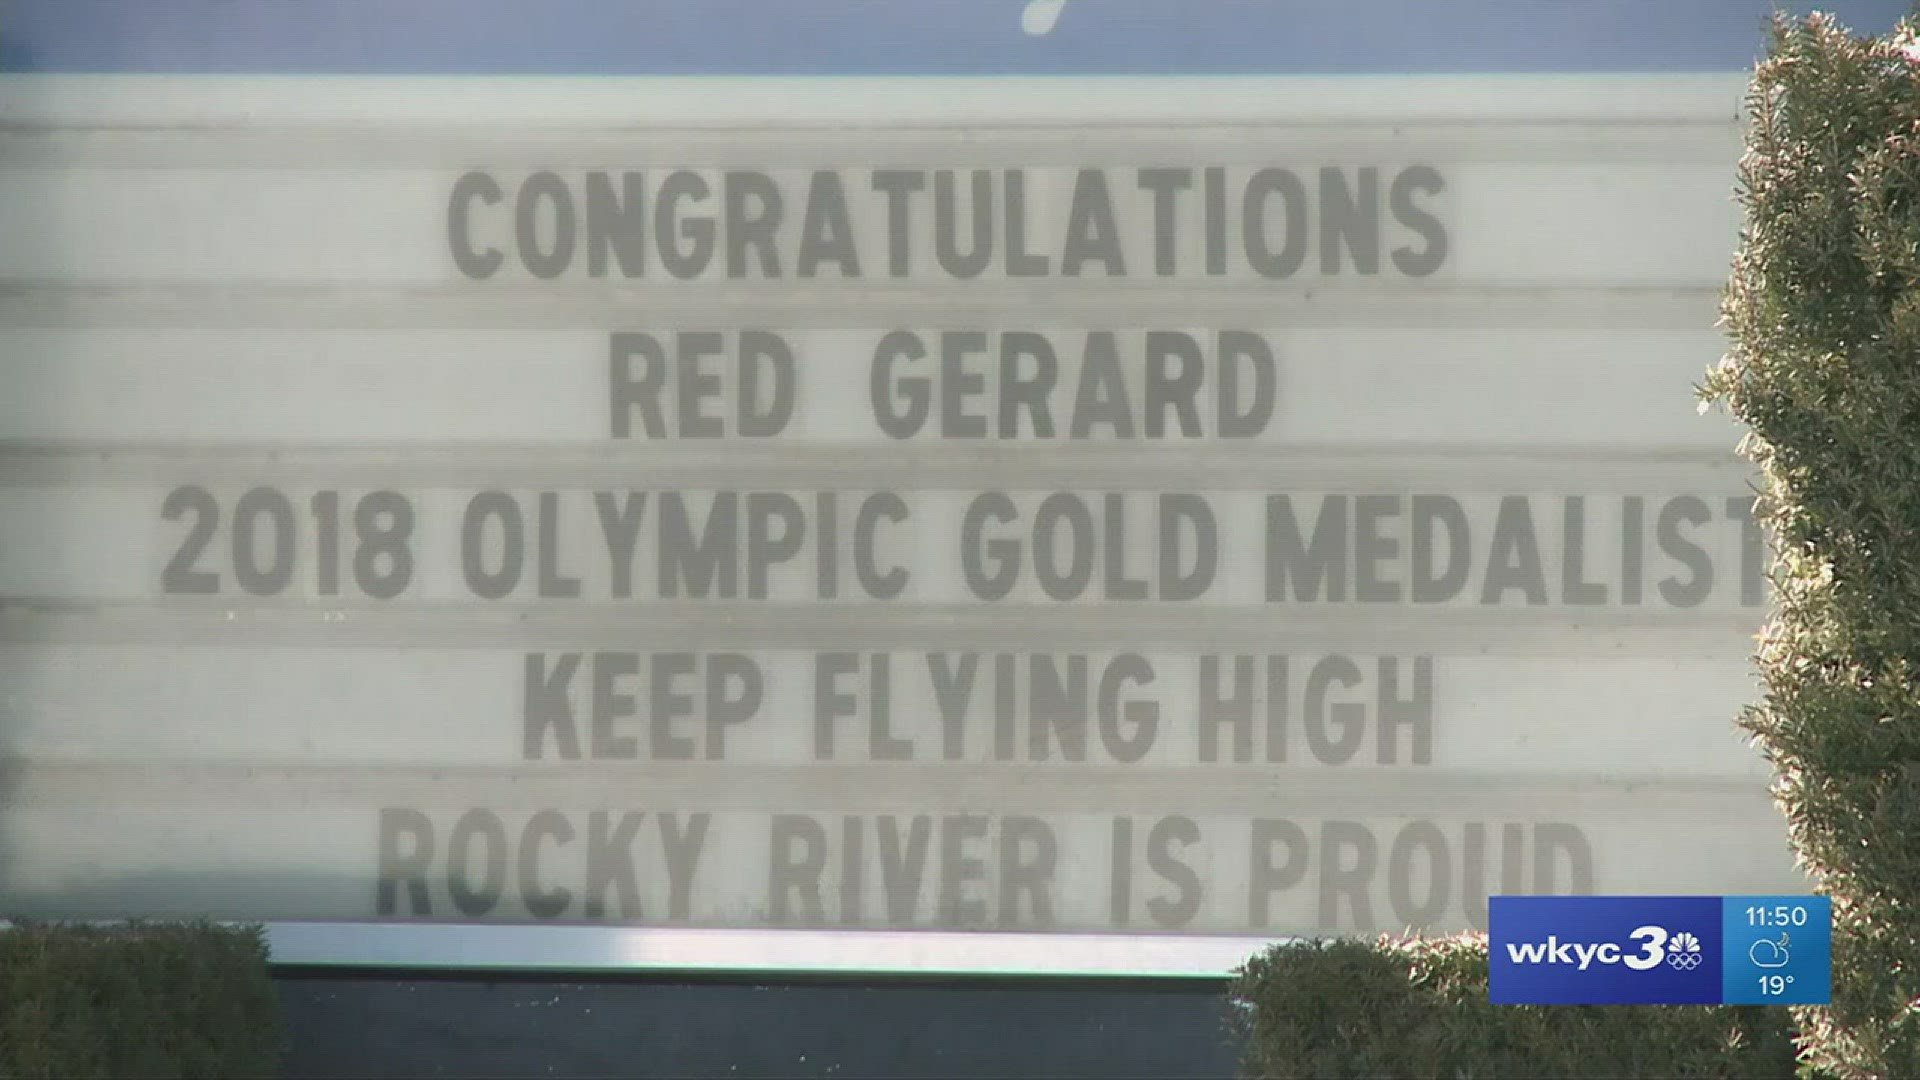 Olympic champion Red Gerard played hockey in Rocky River